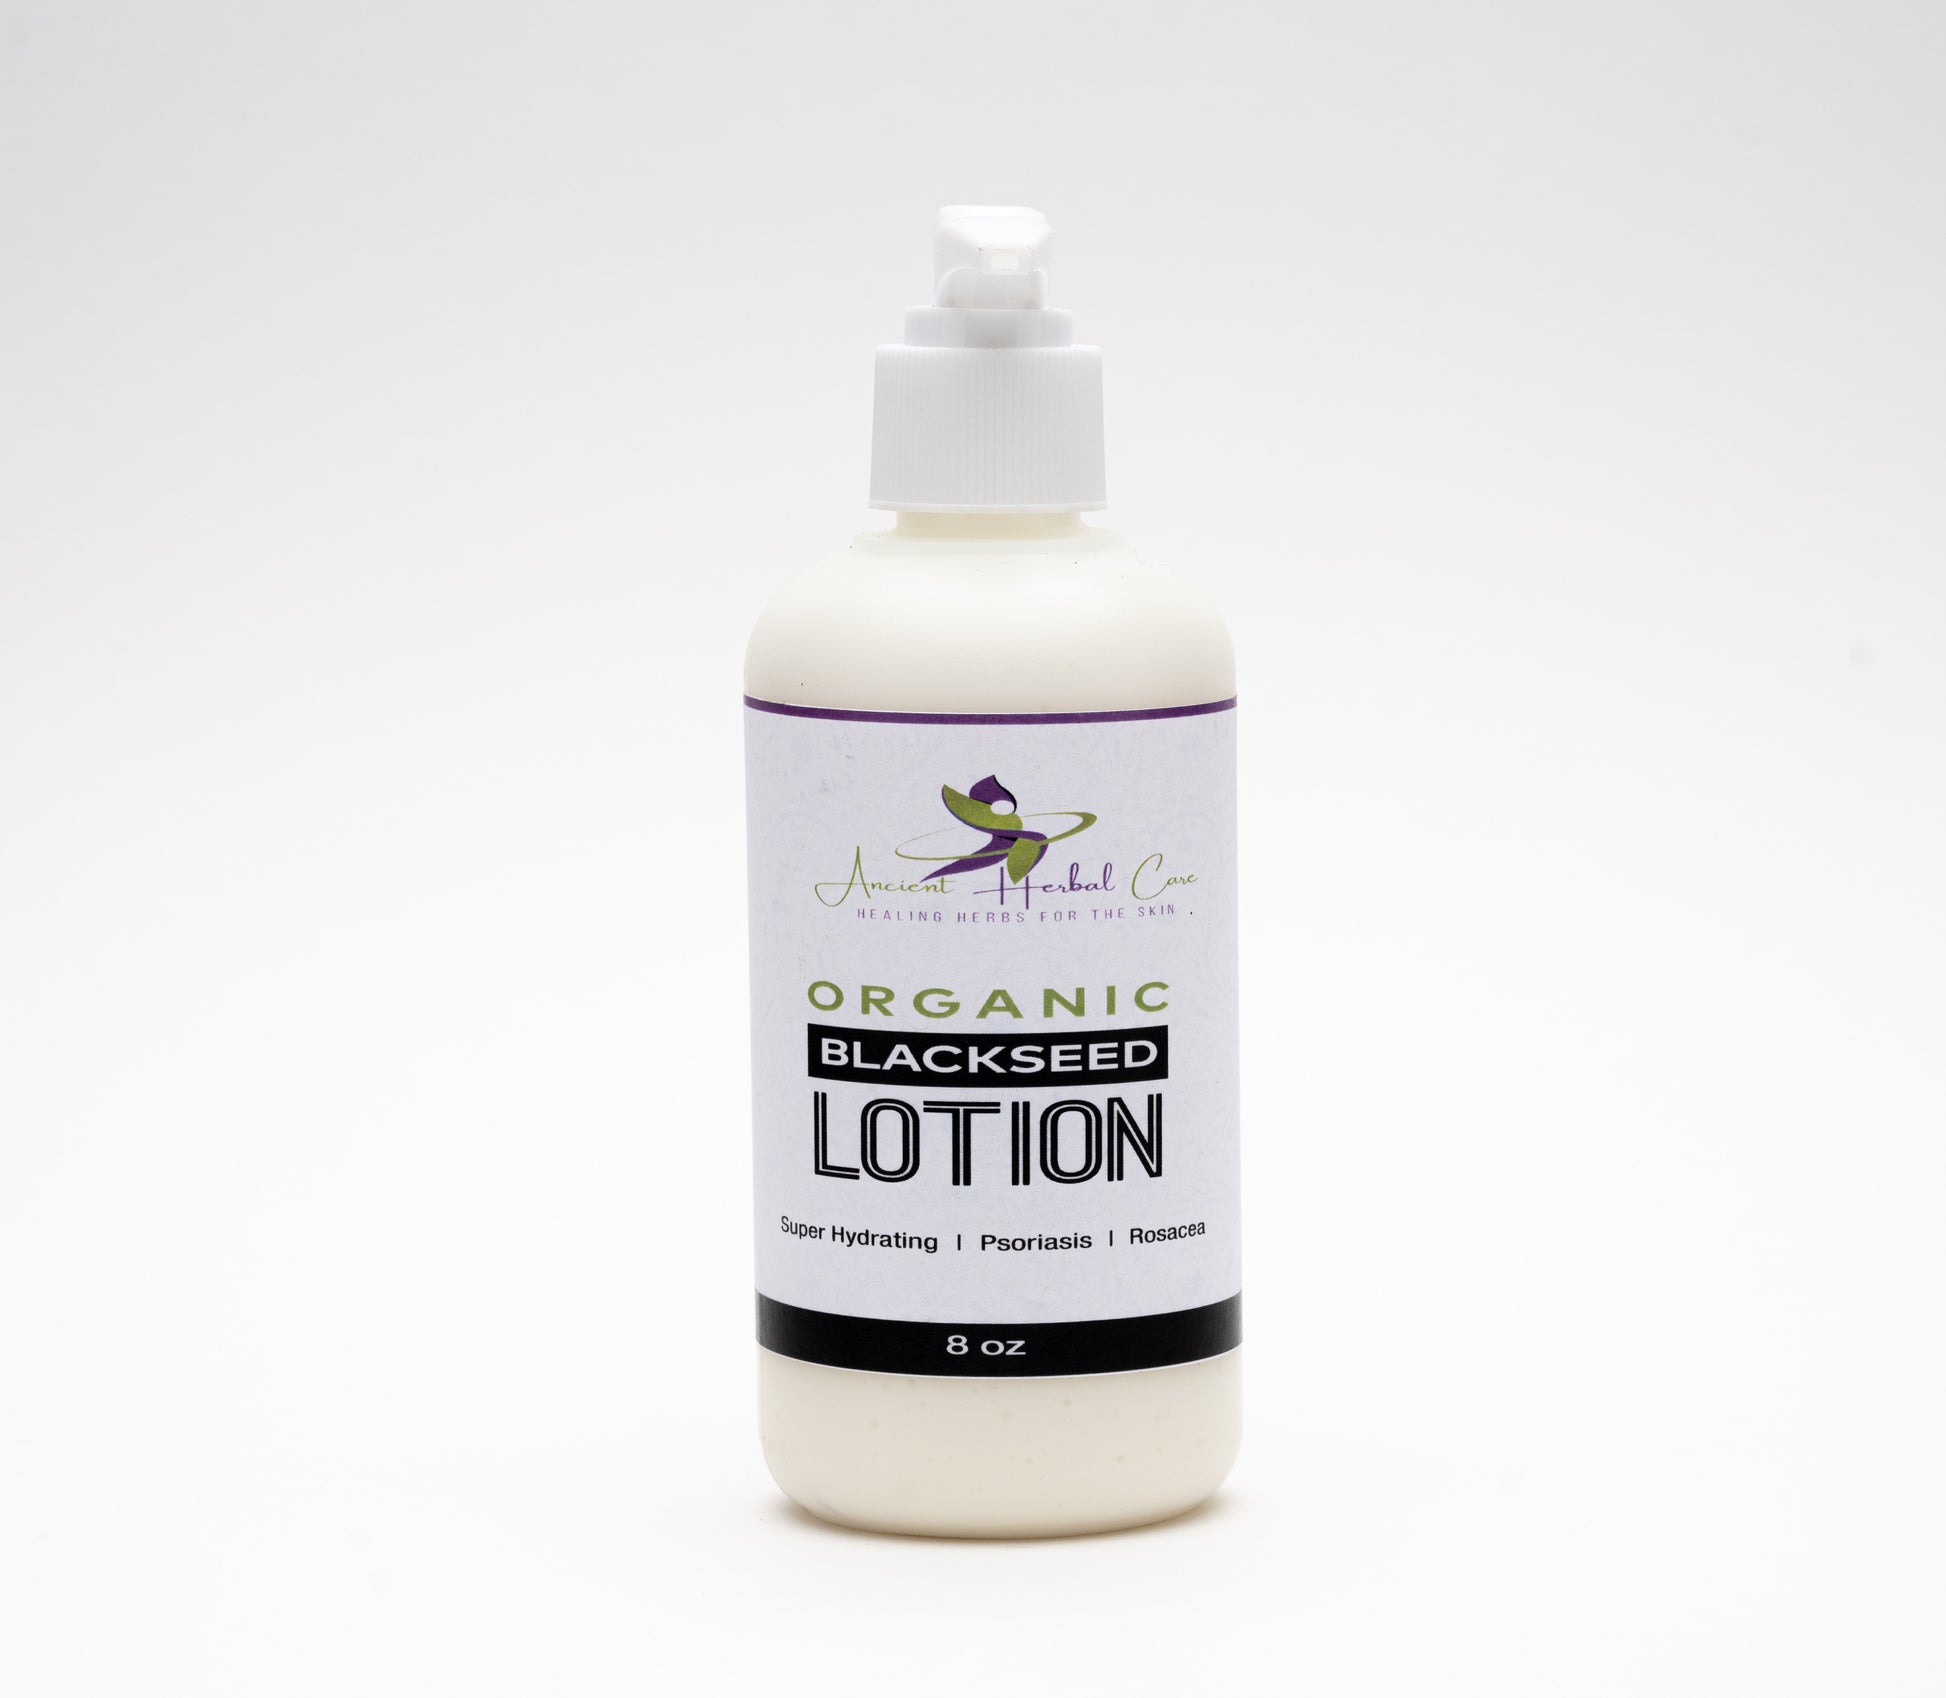 Organic Blackseed Lotion (Psoriasis and Rosacea) - Ancient Herbal Care